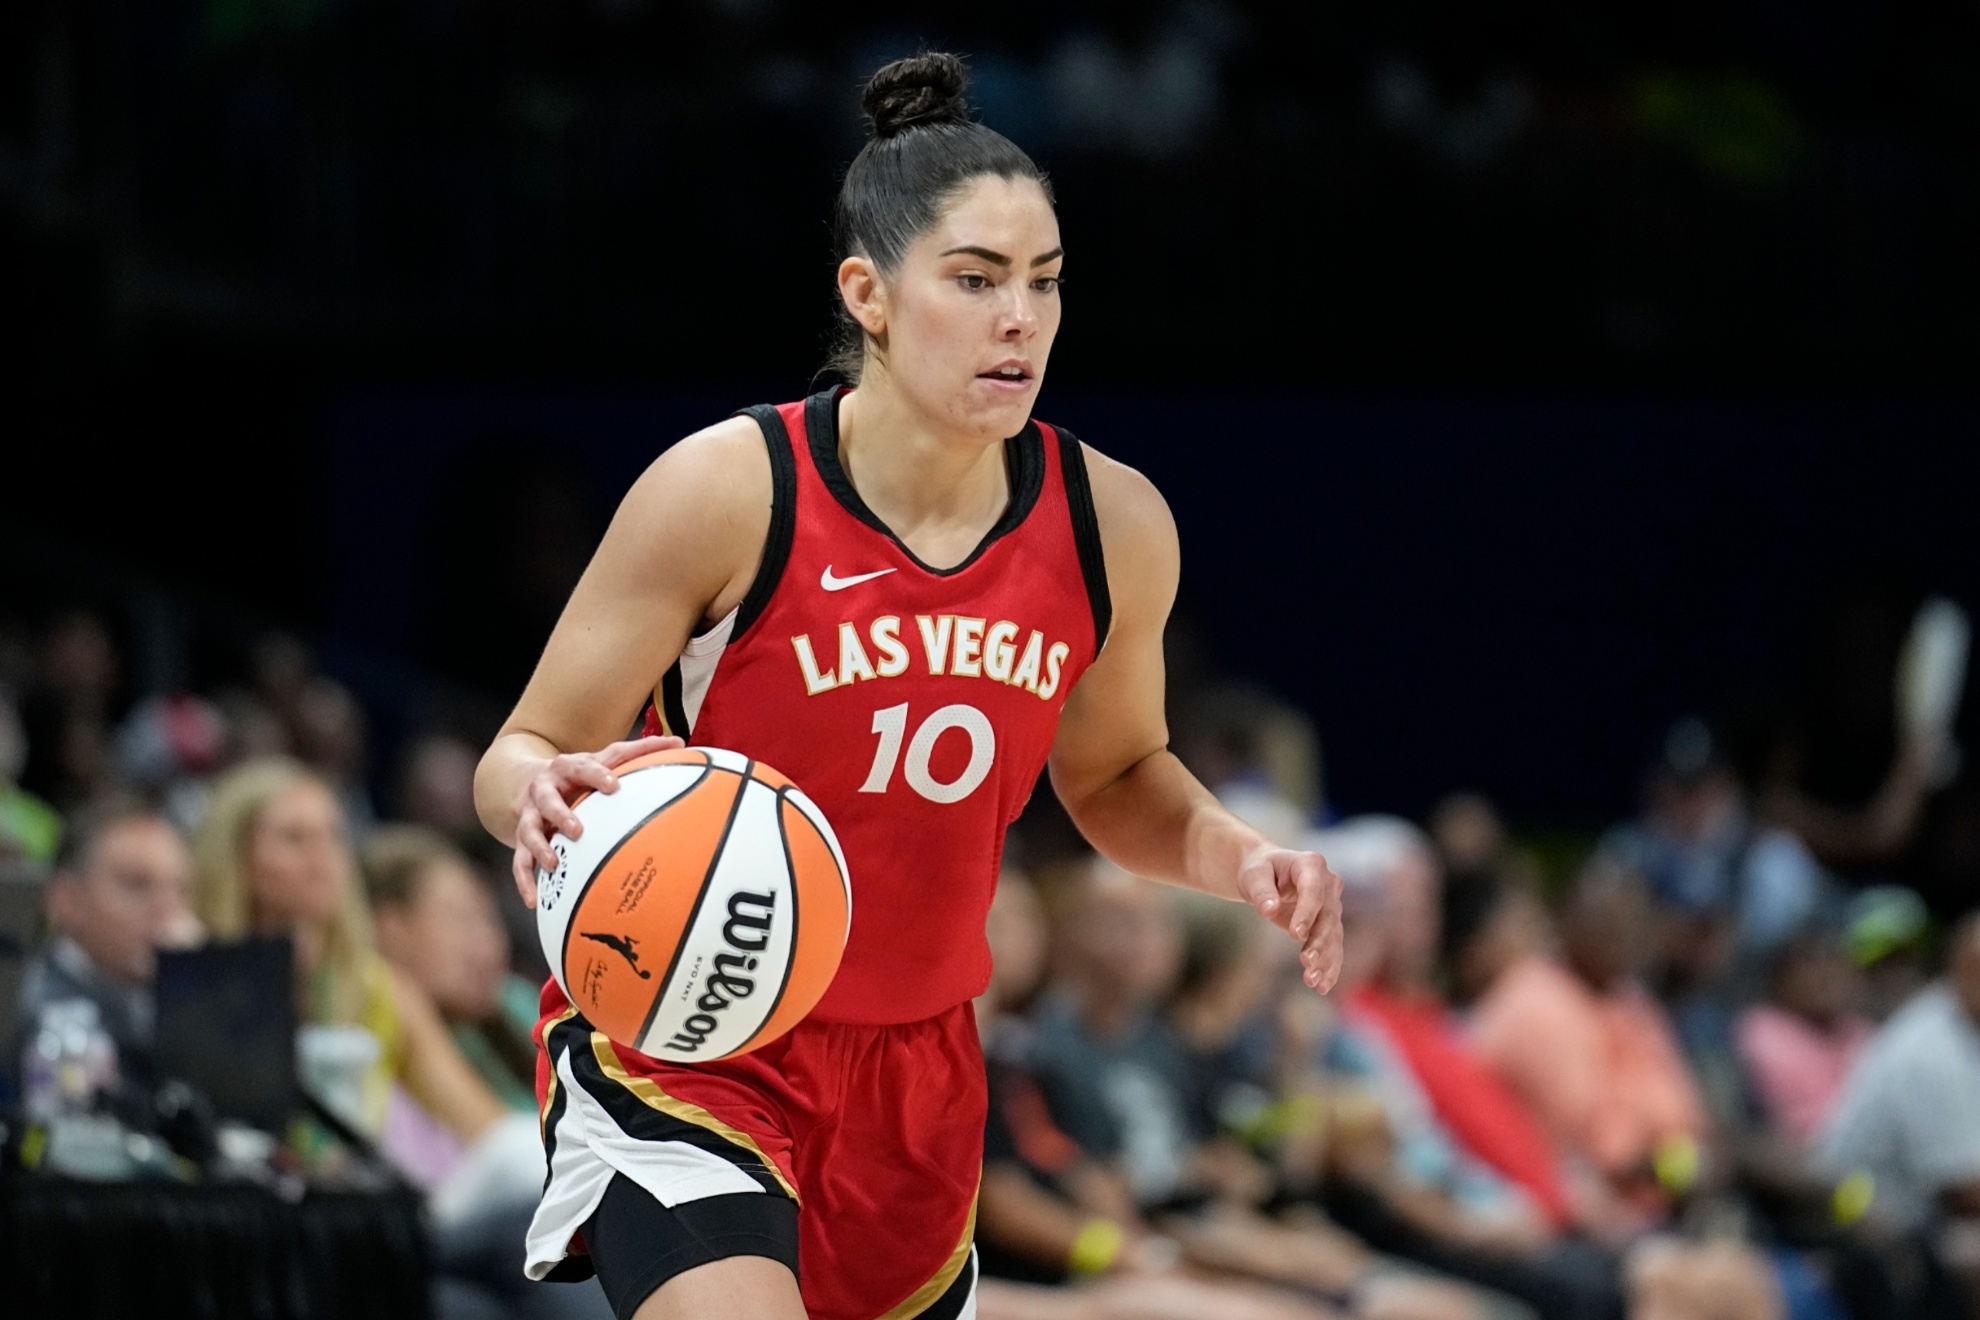 The Las Vegas Aces registered their 30th win of the season, a WNBA record